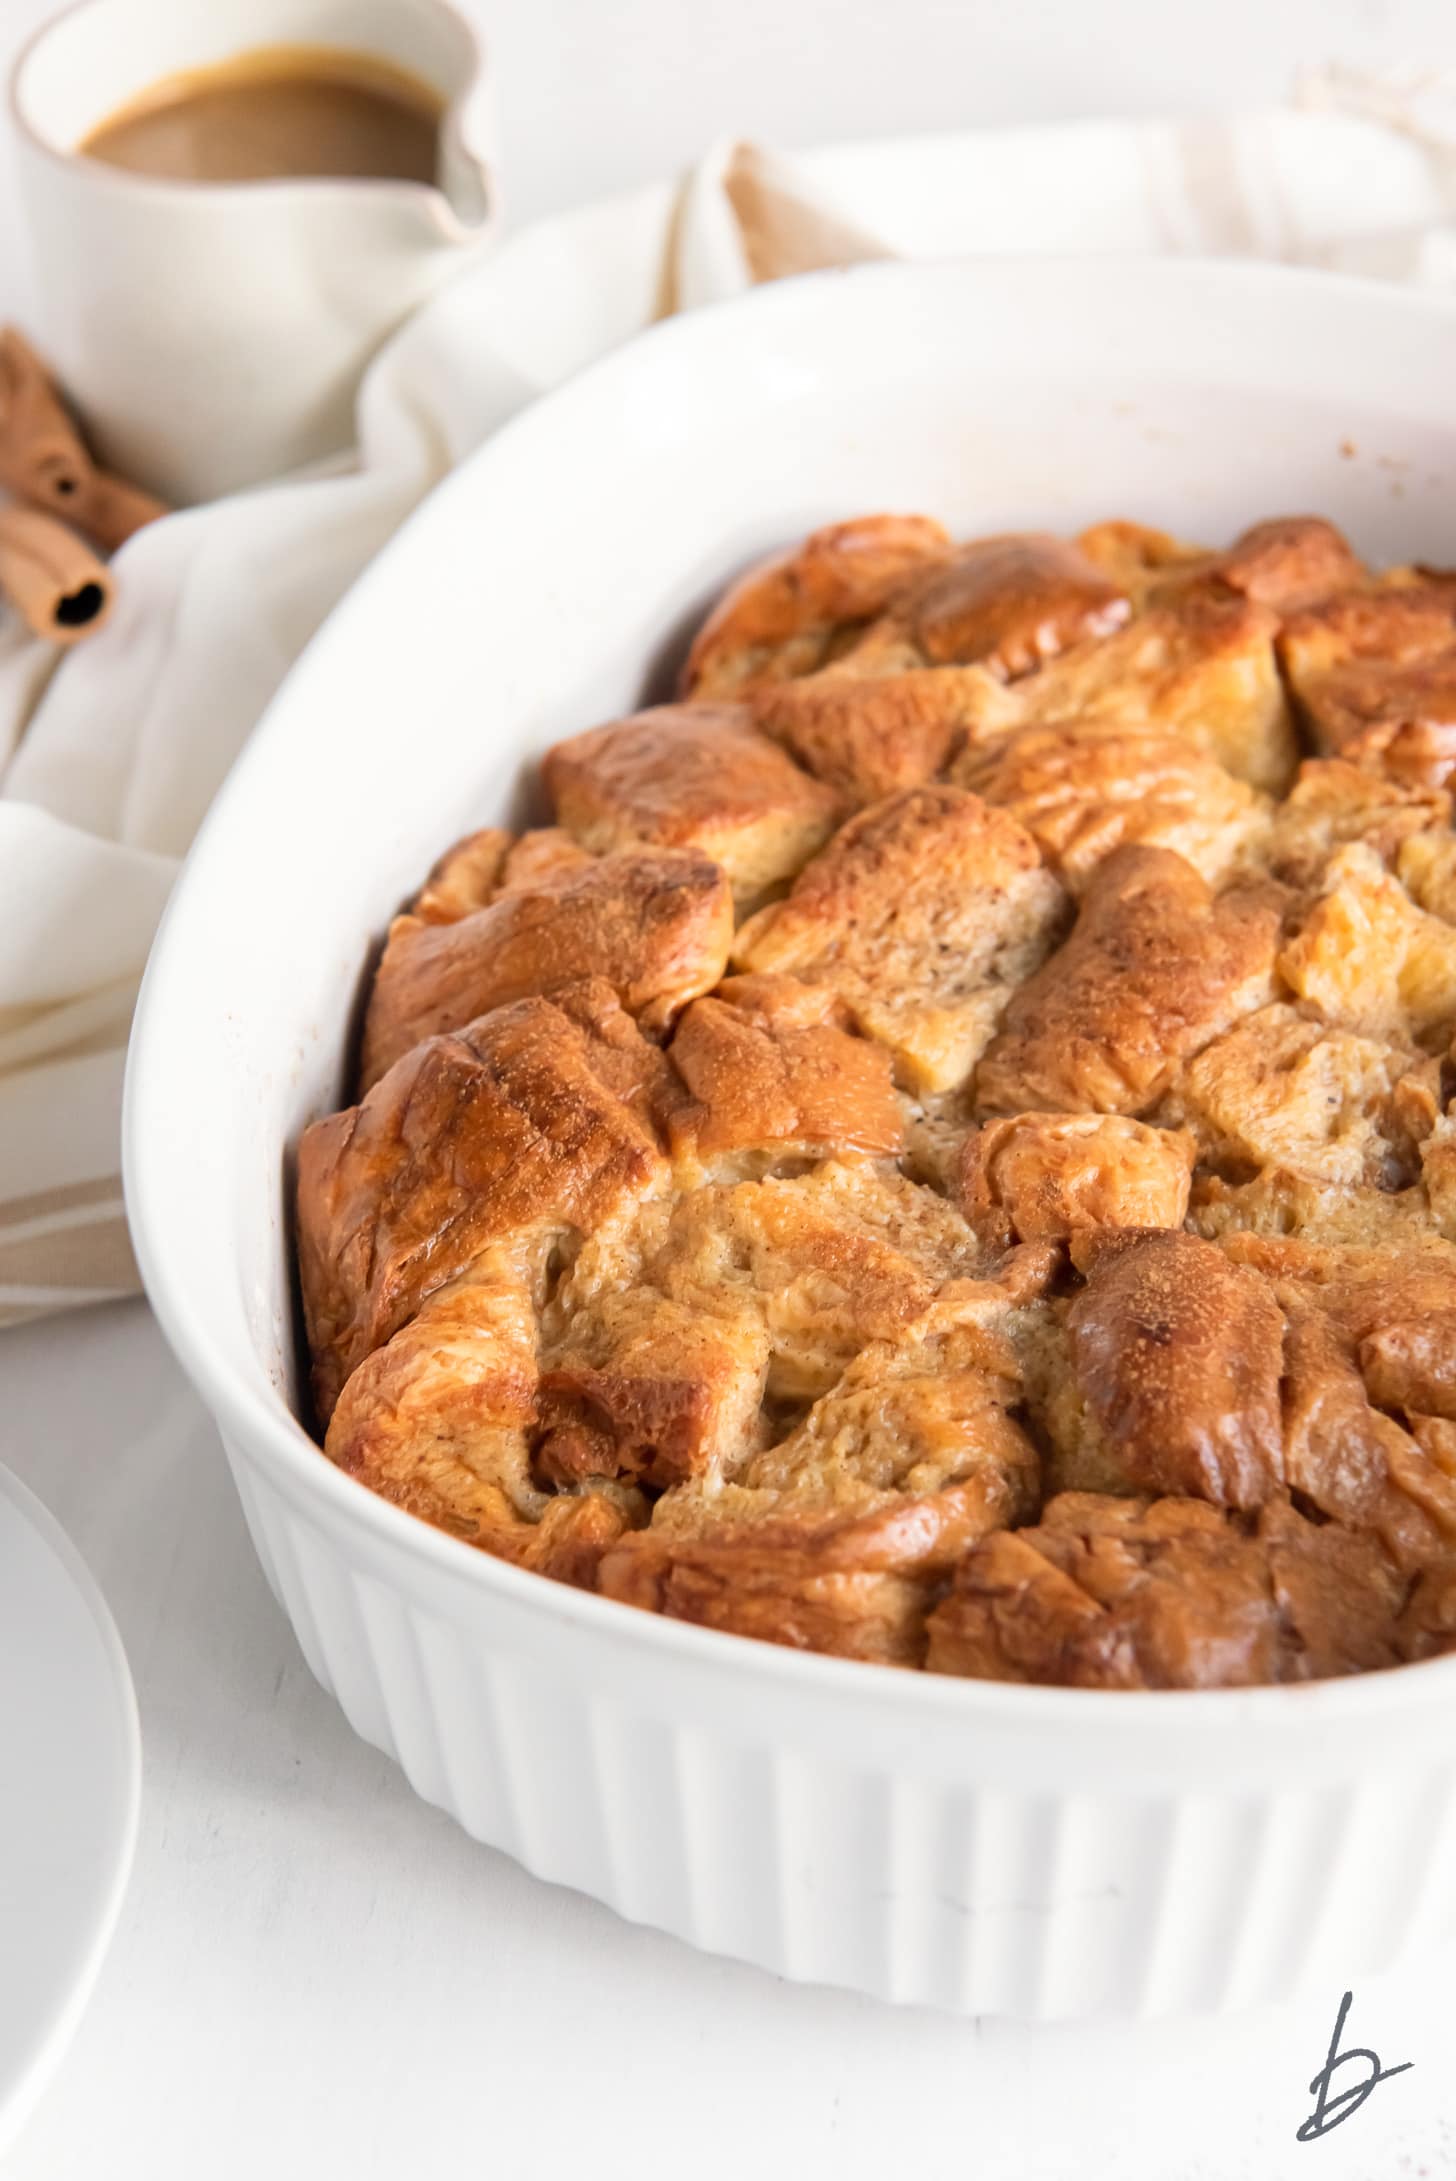 bread pudding in a white baking dish